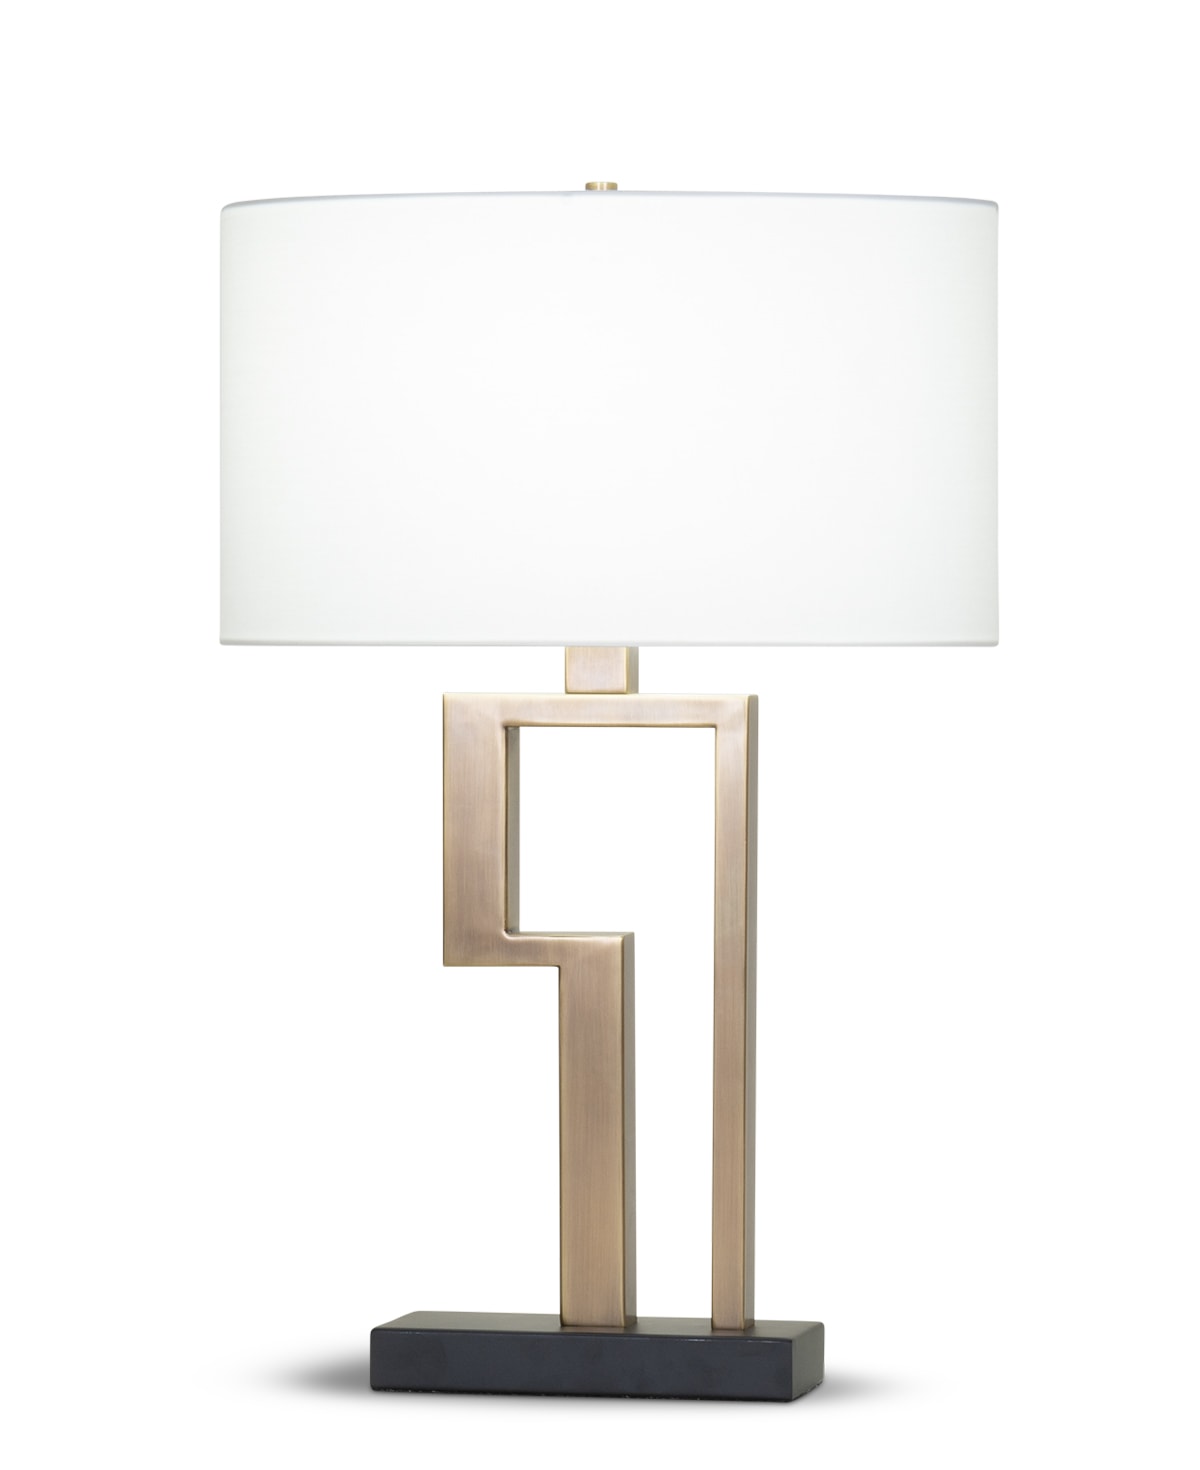 FlowDecor Stella Table Lamp in metal with antique brass & black matte finishes and off-white cotton oval shade (# 4362)